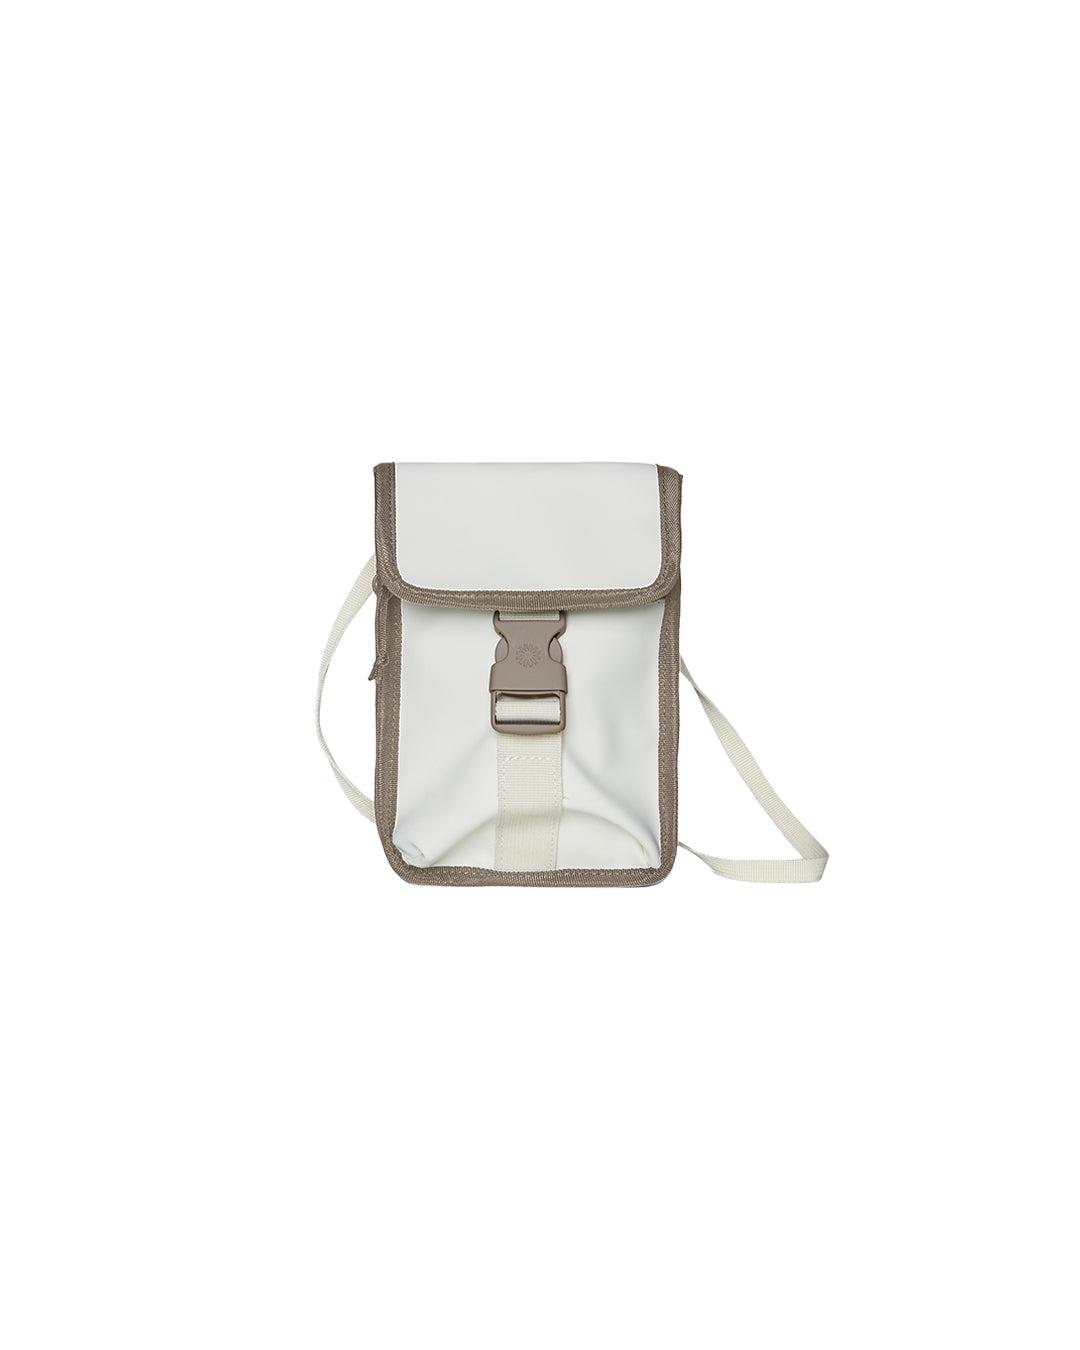 Buckle Money Pouch - NINEPointNINE